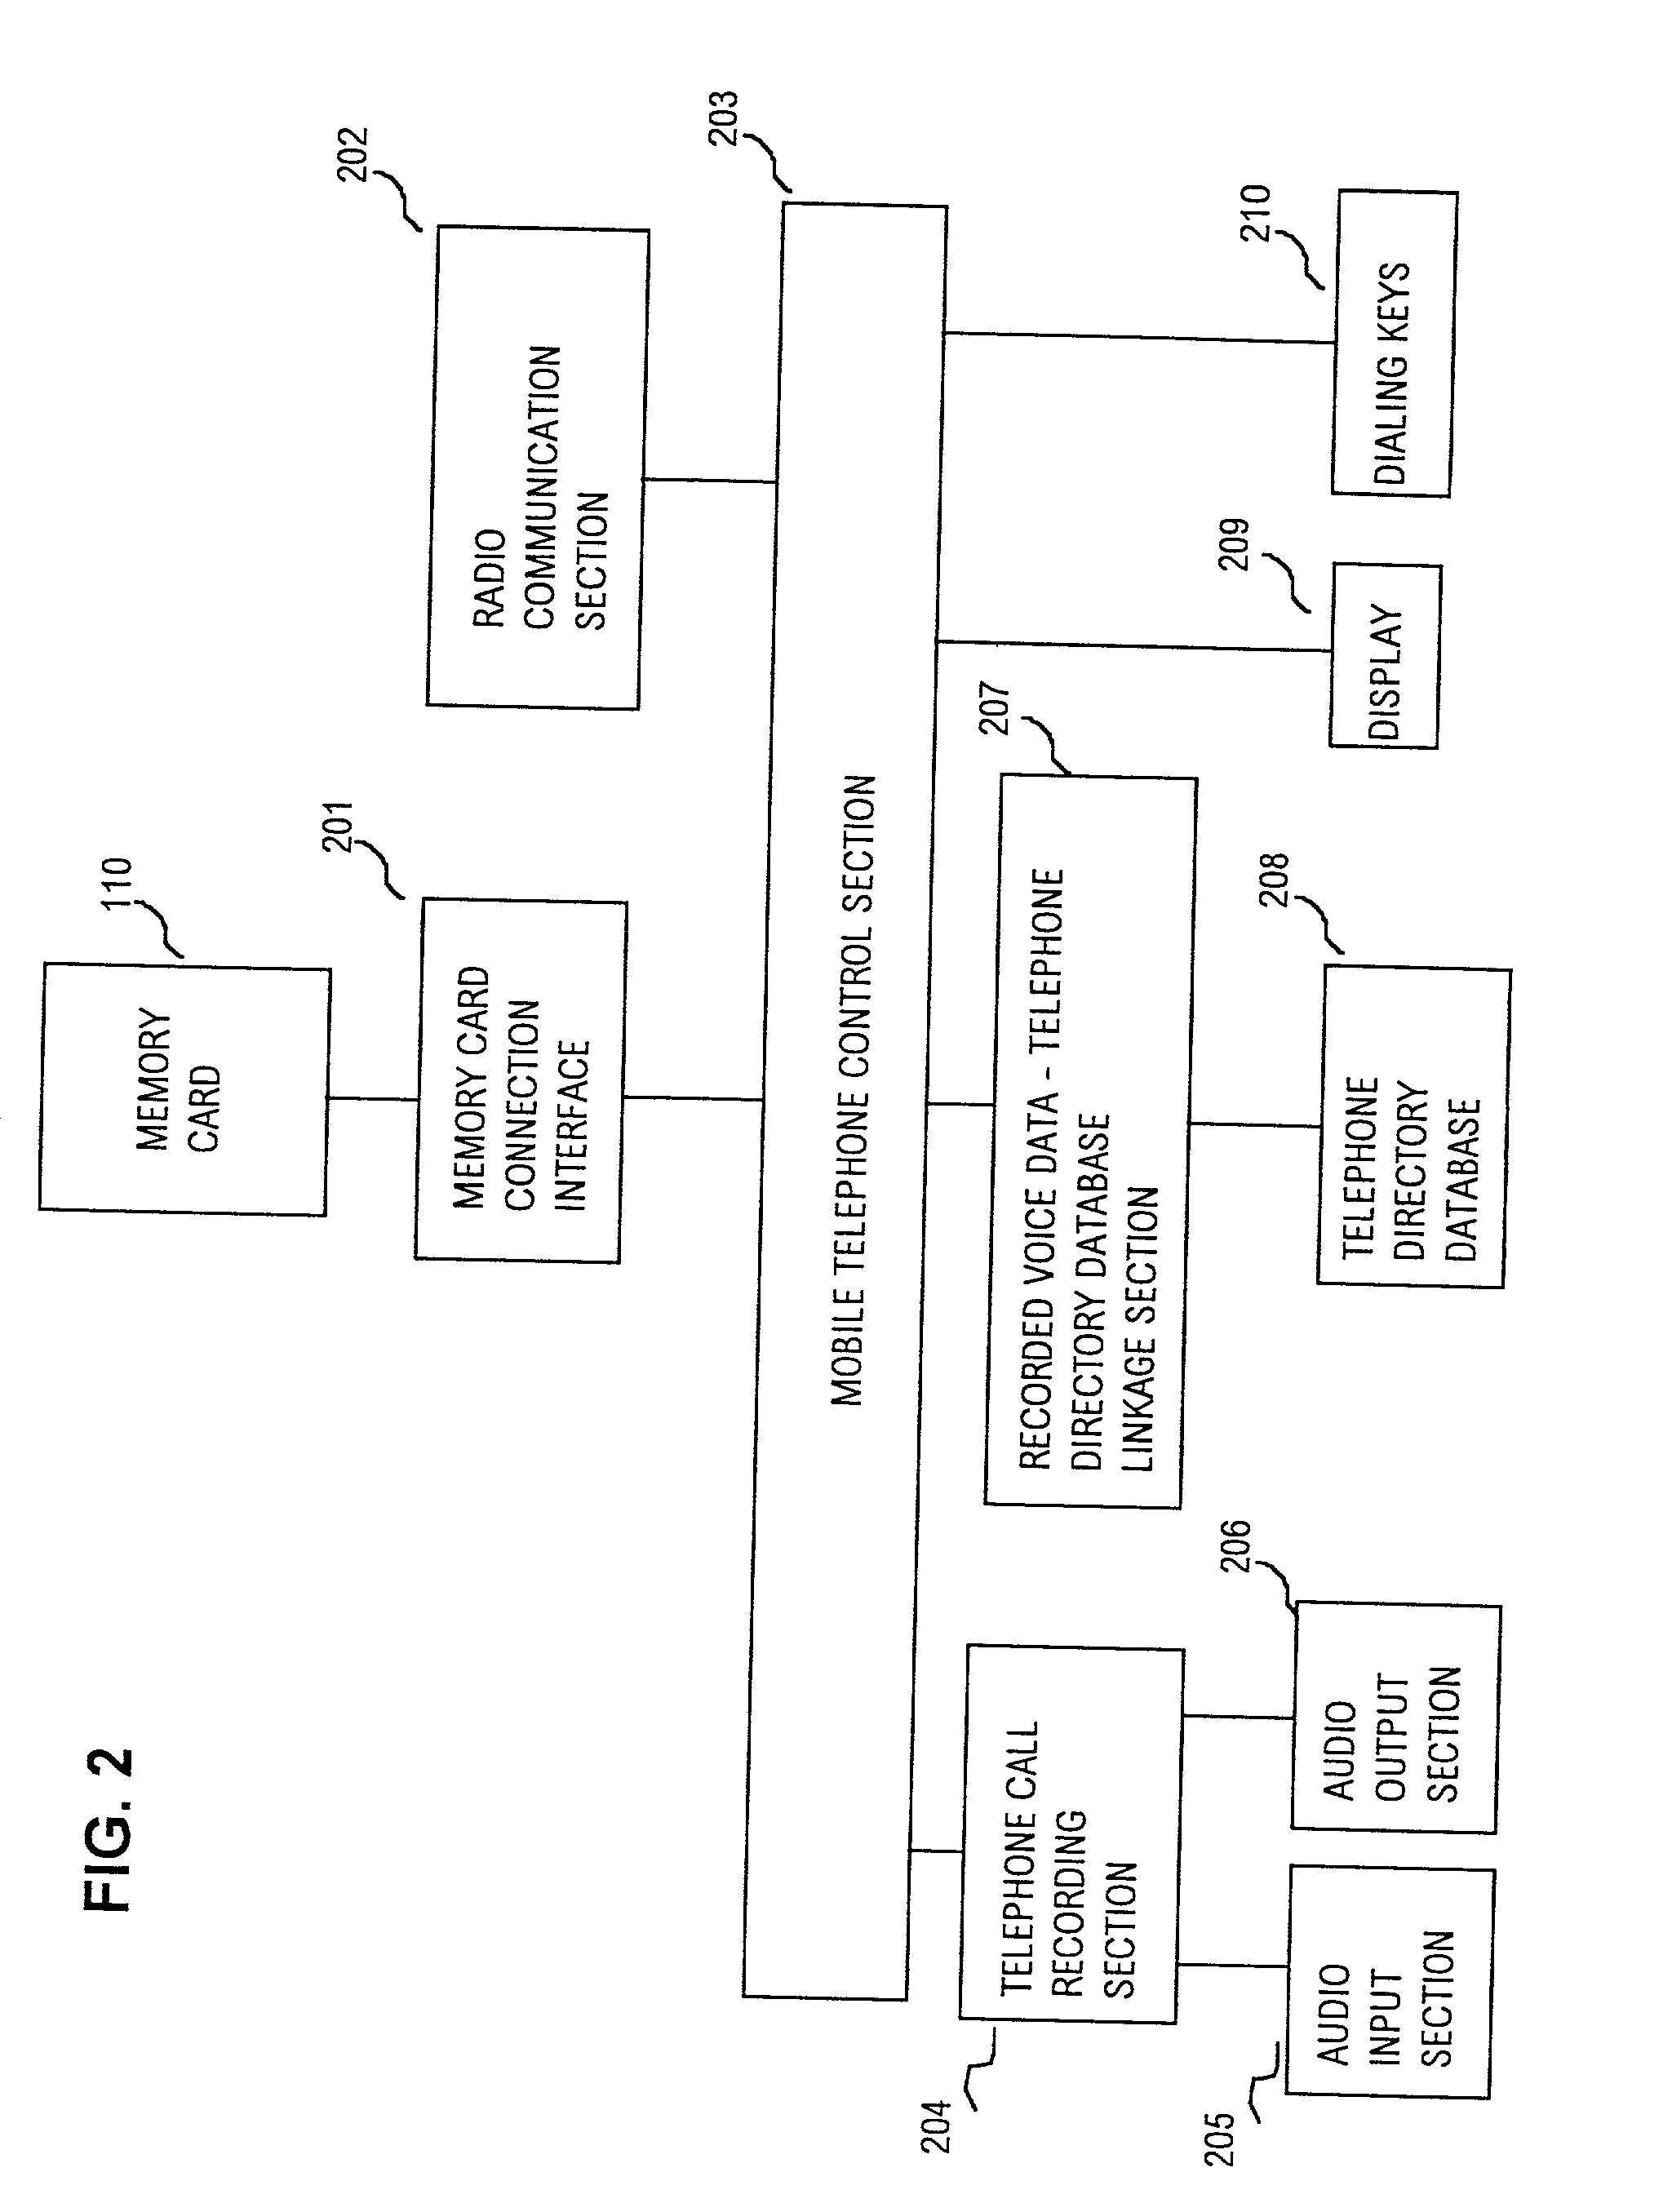 Data recording system for storing as data the contents of telephone calls made by internal telephones and by mobile telephones having memory card data storage function